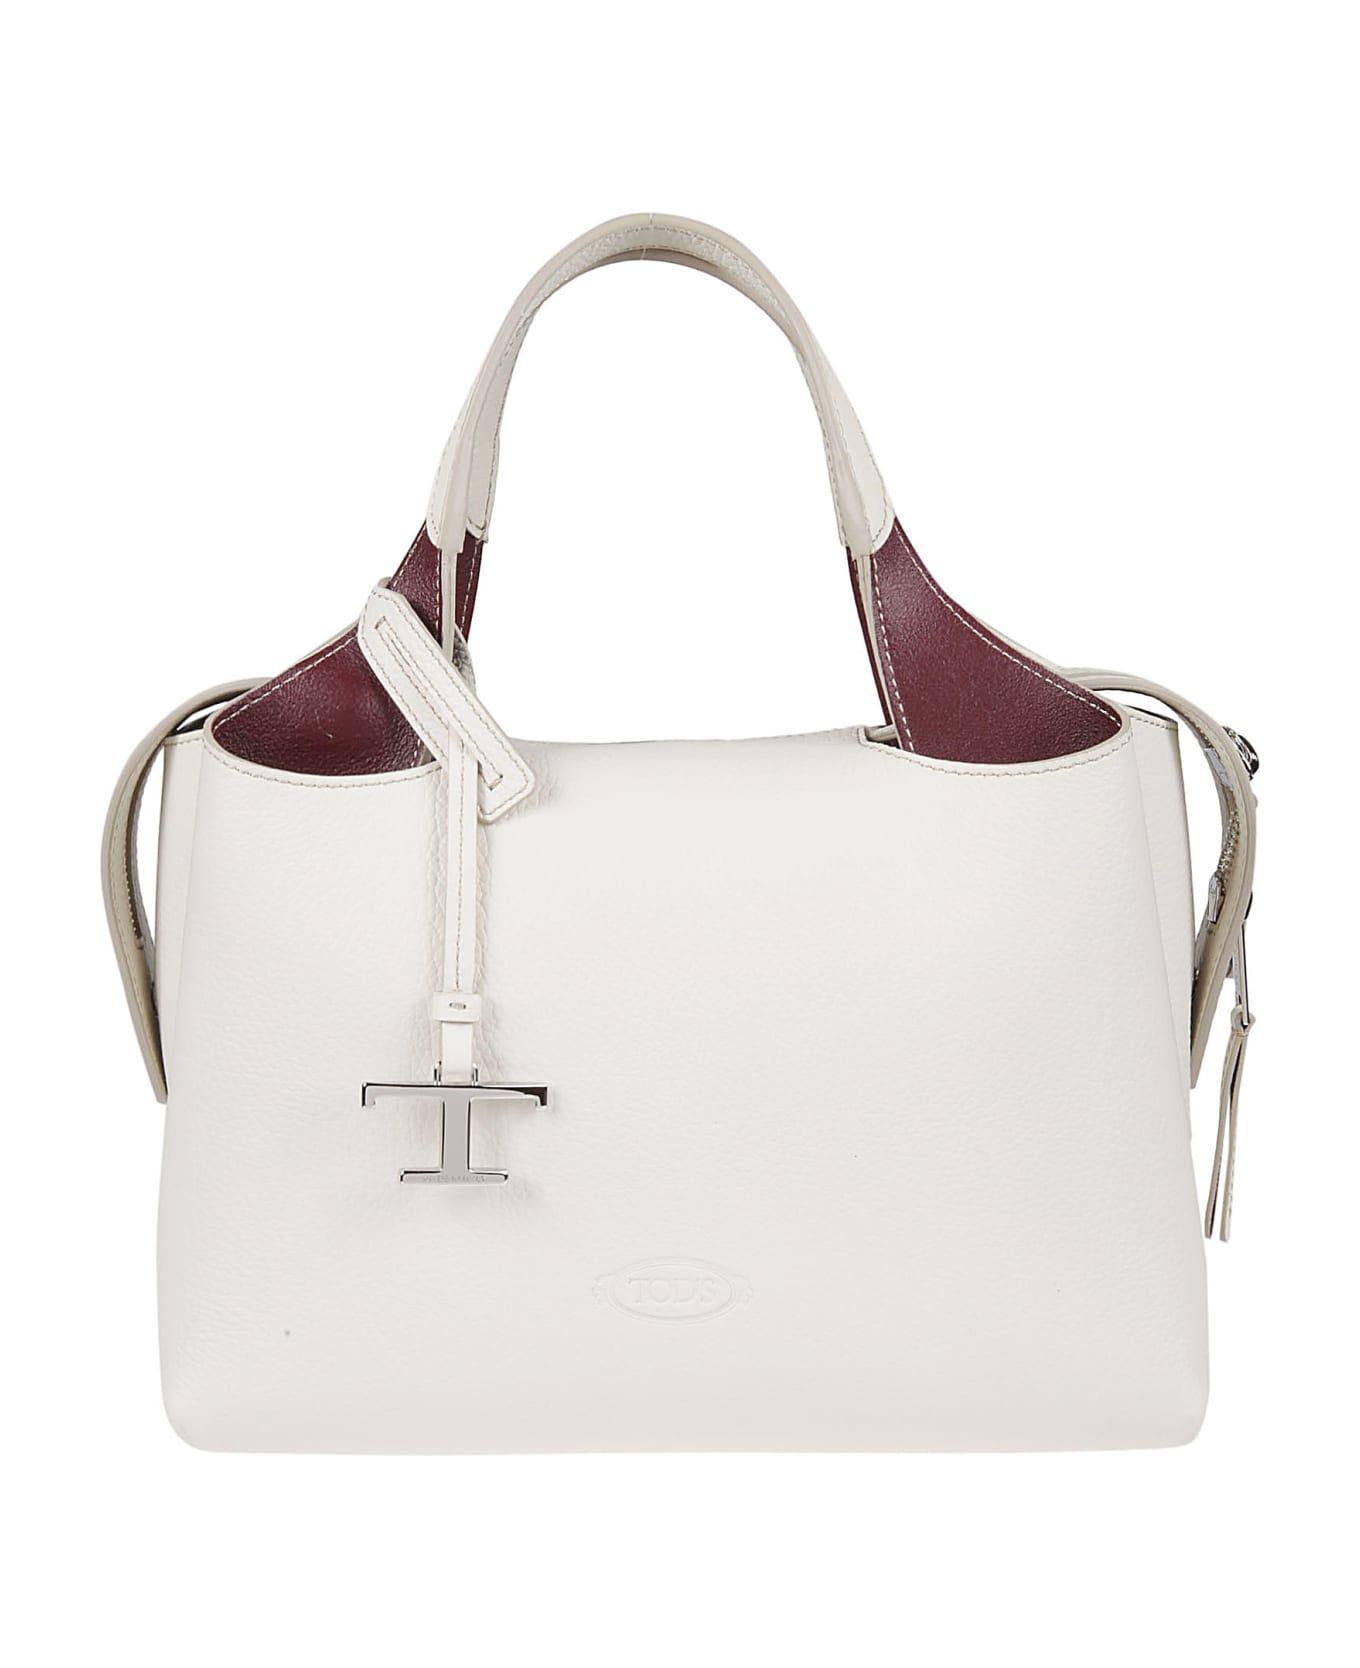 Tod's Top Zipped Dual Handle Tote - Bianco Calce/bordeaux Scuro